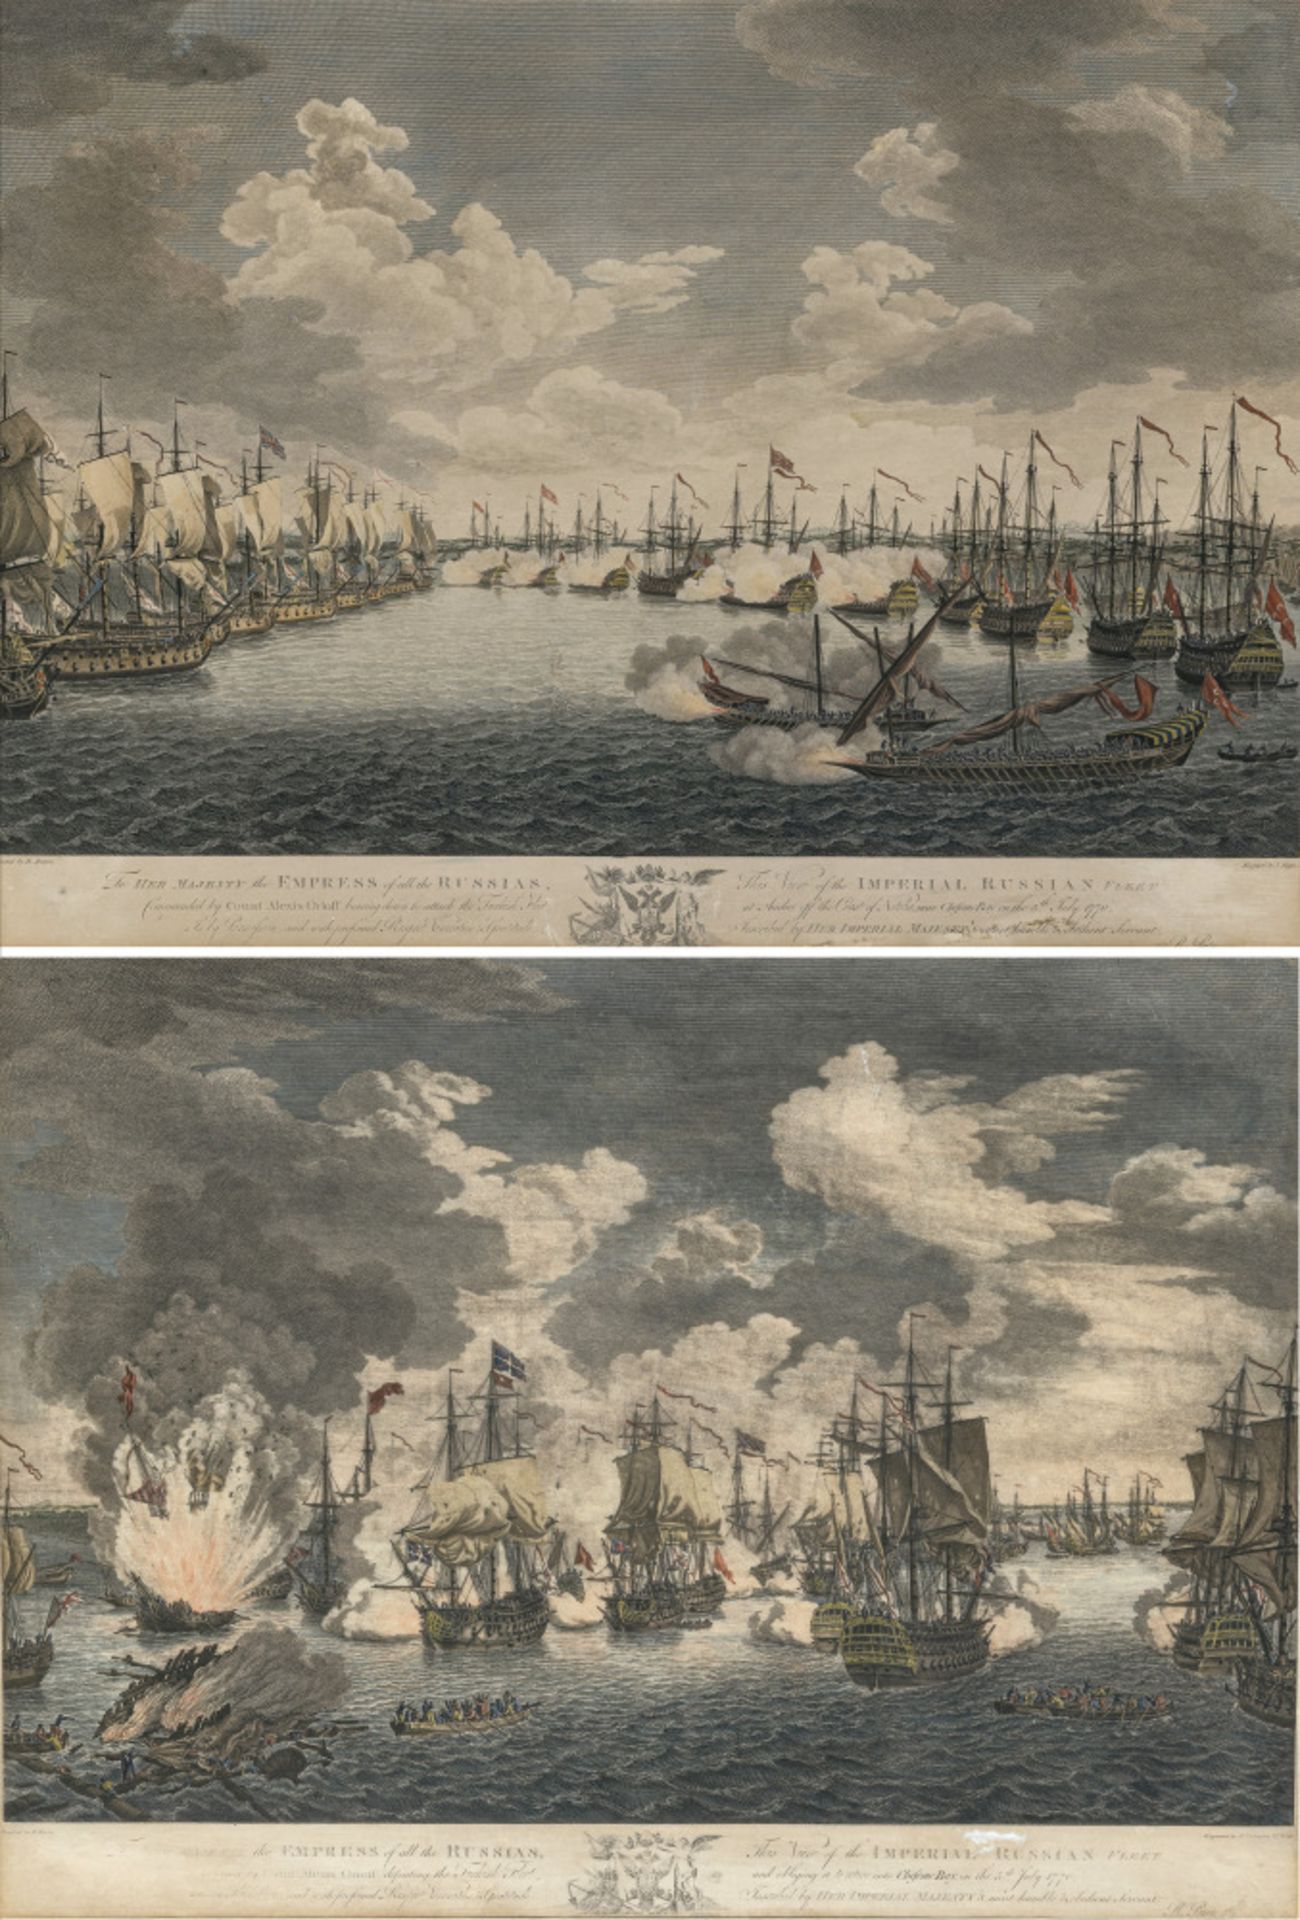 Richard Paton, nach - "The View of the Imperial Russian Fleet (...) Cheseme Bay on the 5th July 1770